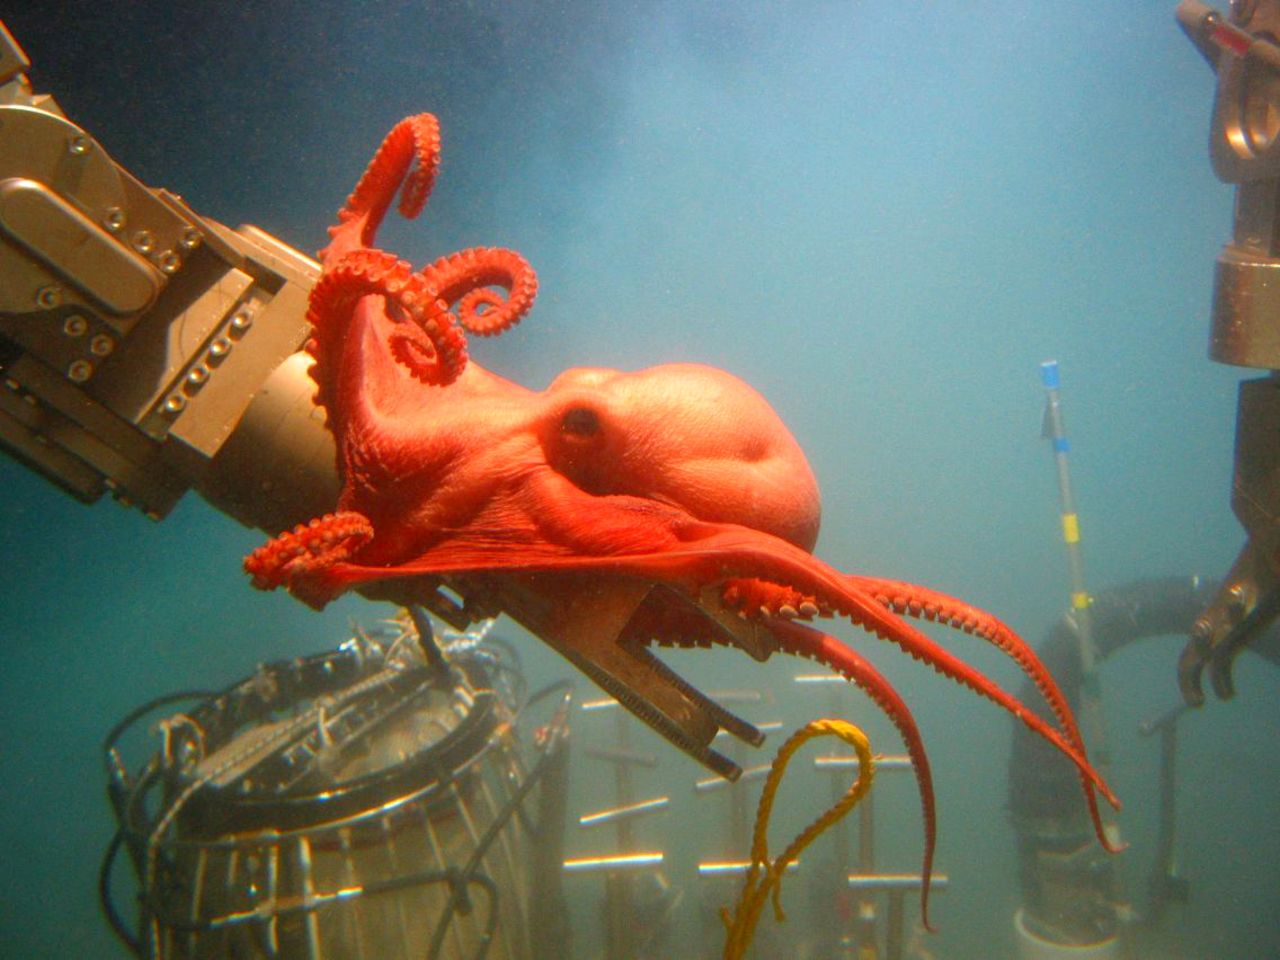 Alvin pilot Bruce Strickrott encountered a docile deep-sea octopus 2,300 meters down in the Gulf of Mexico. Instead of swimming away, it grabbed the submersible's robotic arm, normally used for picking up samples of seafloor rocks and organisms.